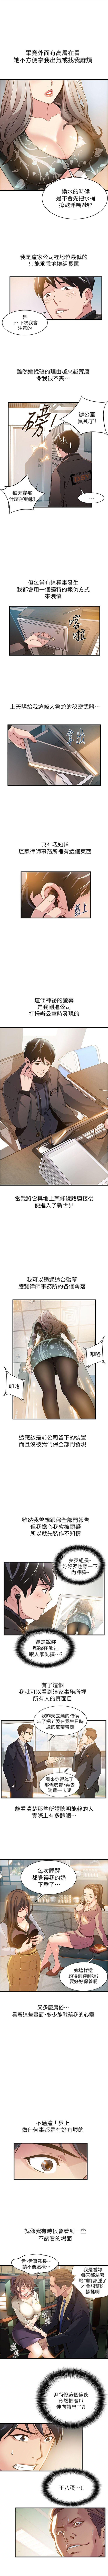 Homosexual 弱點 1-87 官方中文（連載中） Plump - Page 6